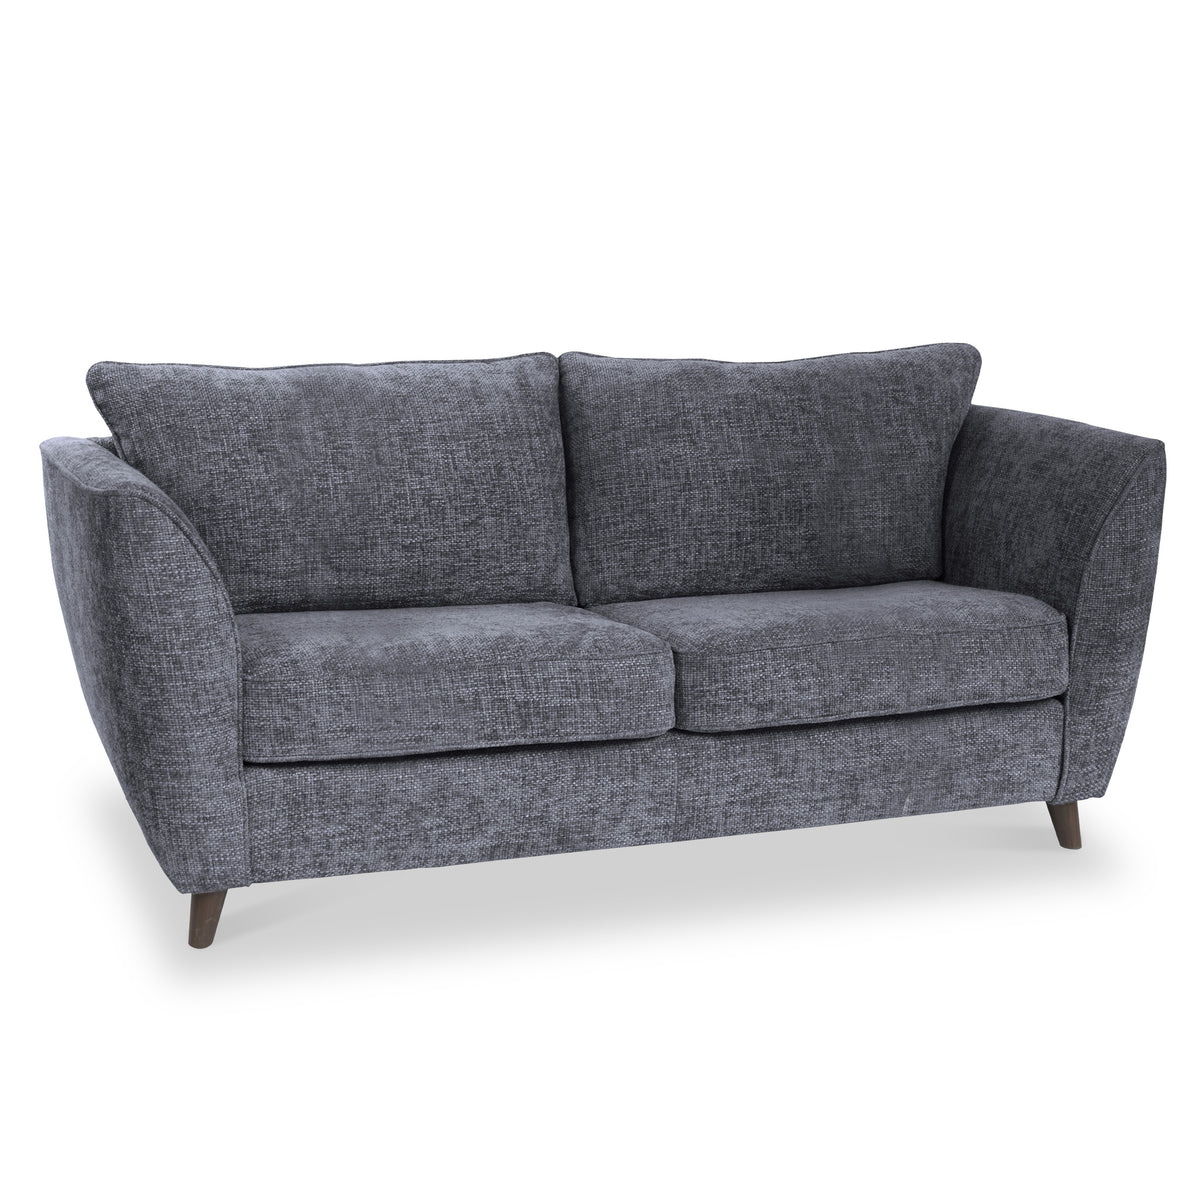 Tamsin Navy 3 Seater Sofa from Roseland Furniture